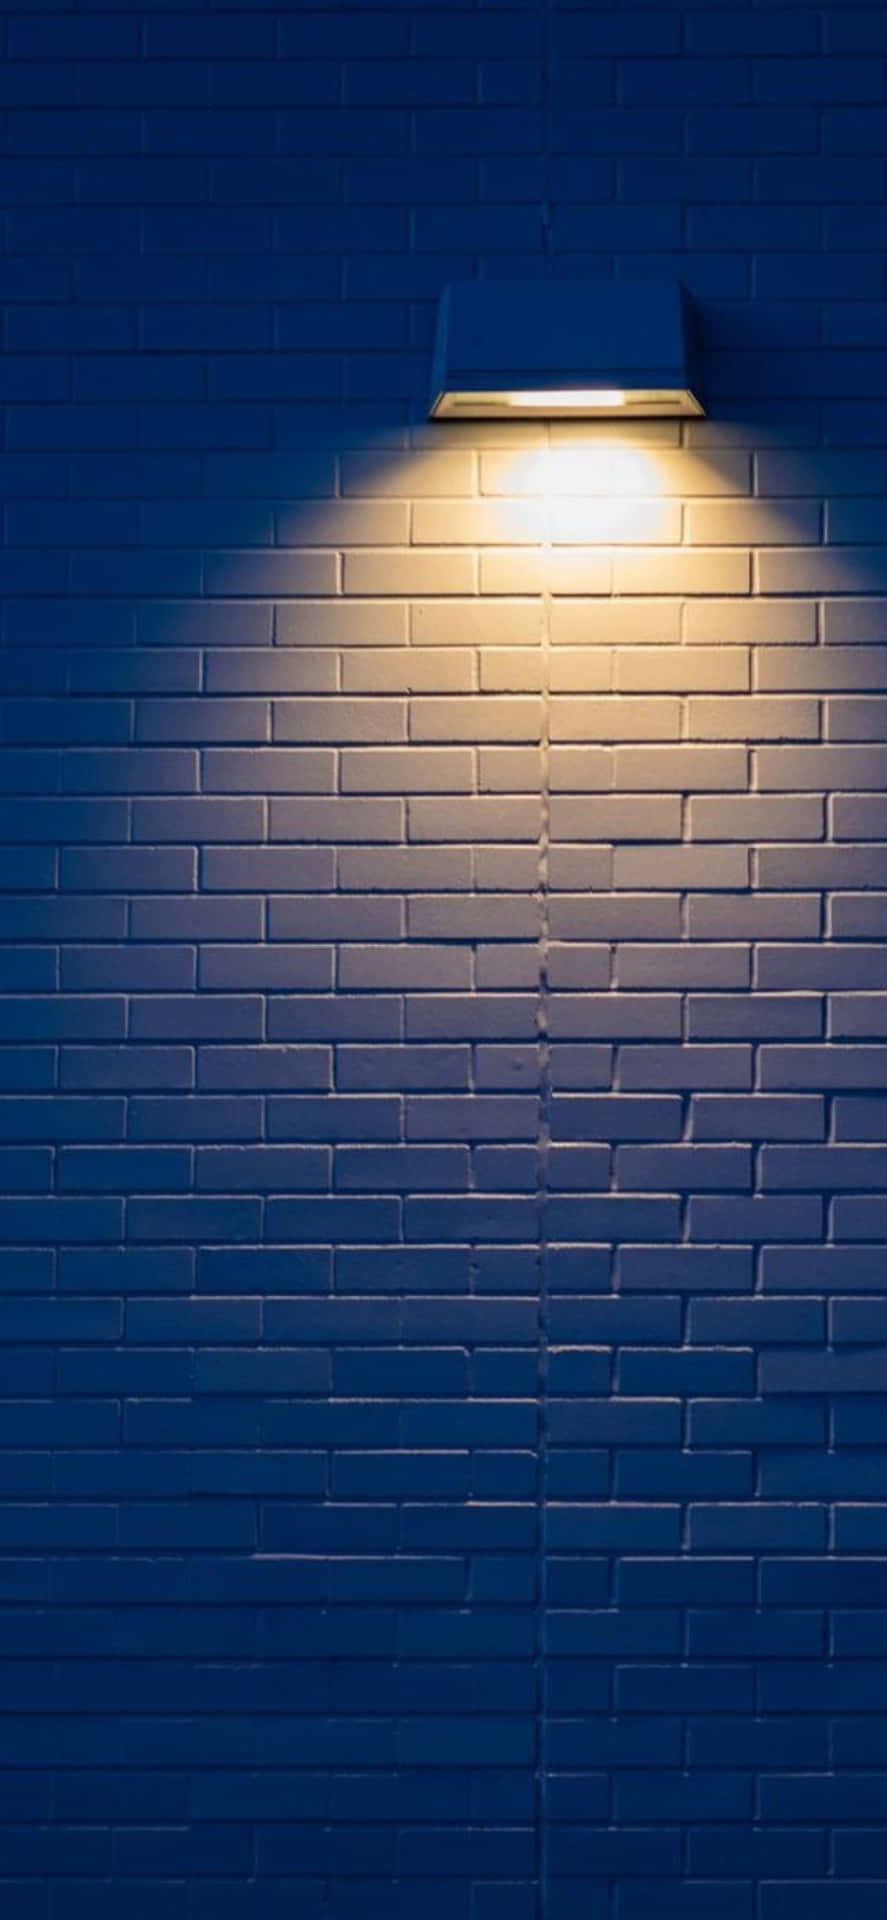 Download Lamp On A Brick Wall Iphone X Minimal Background ...